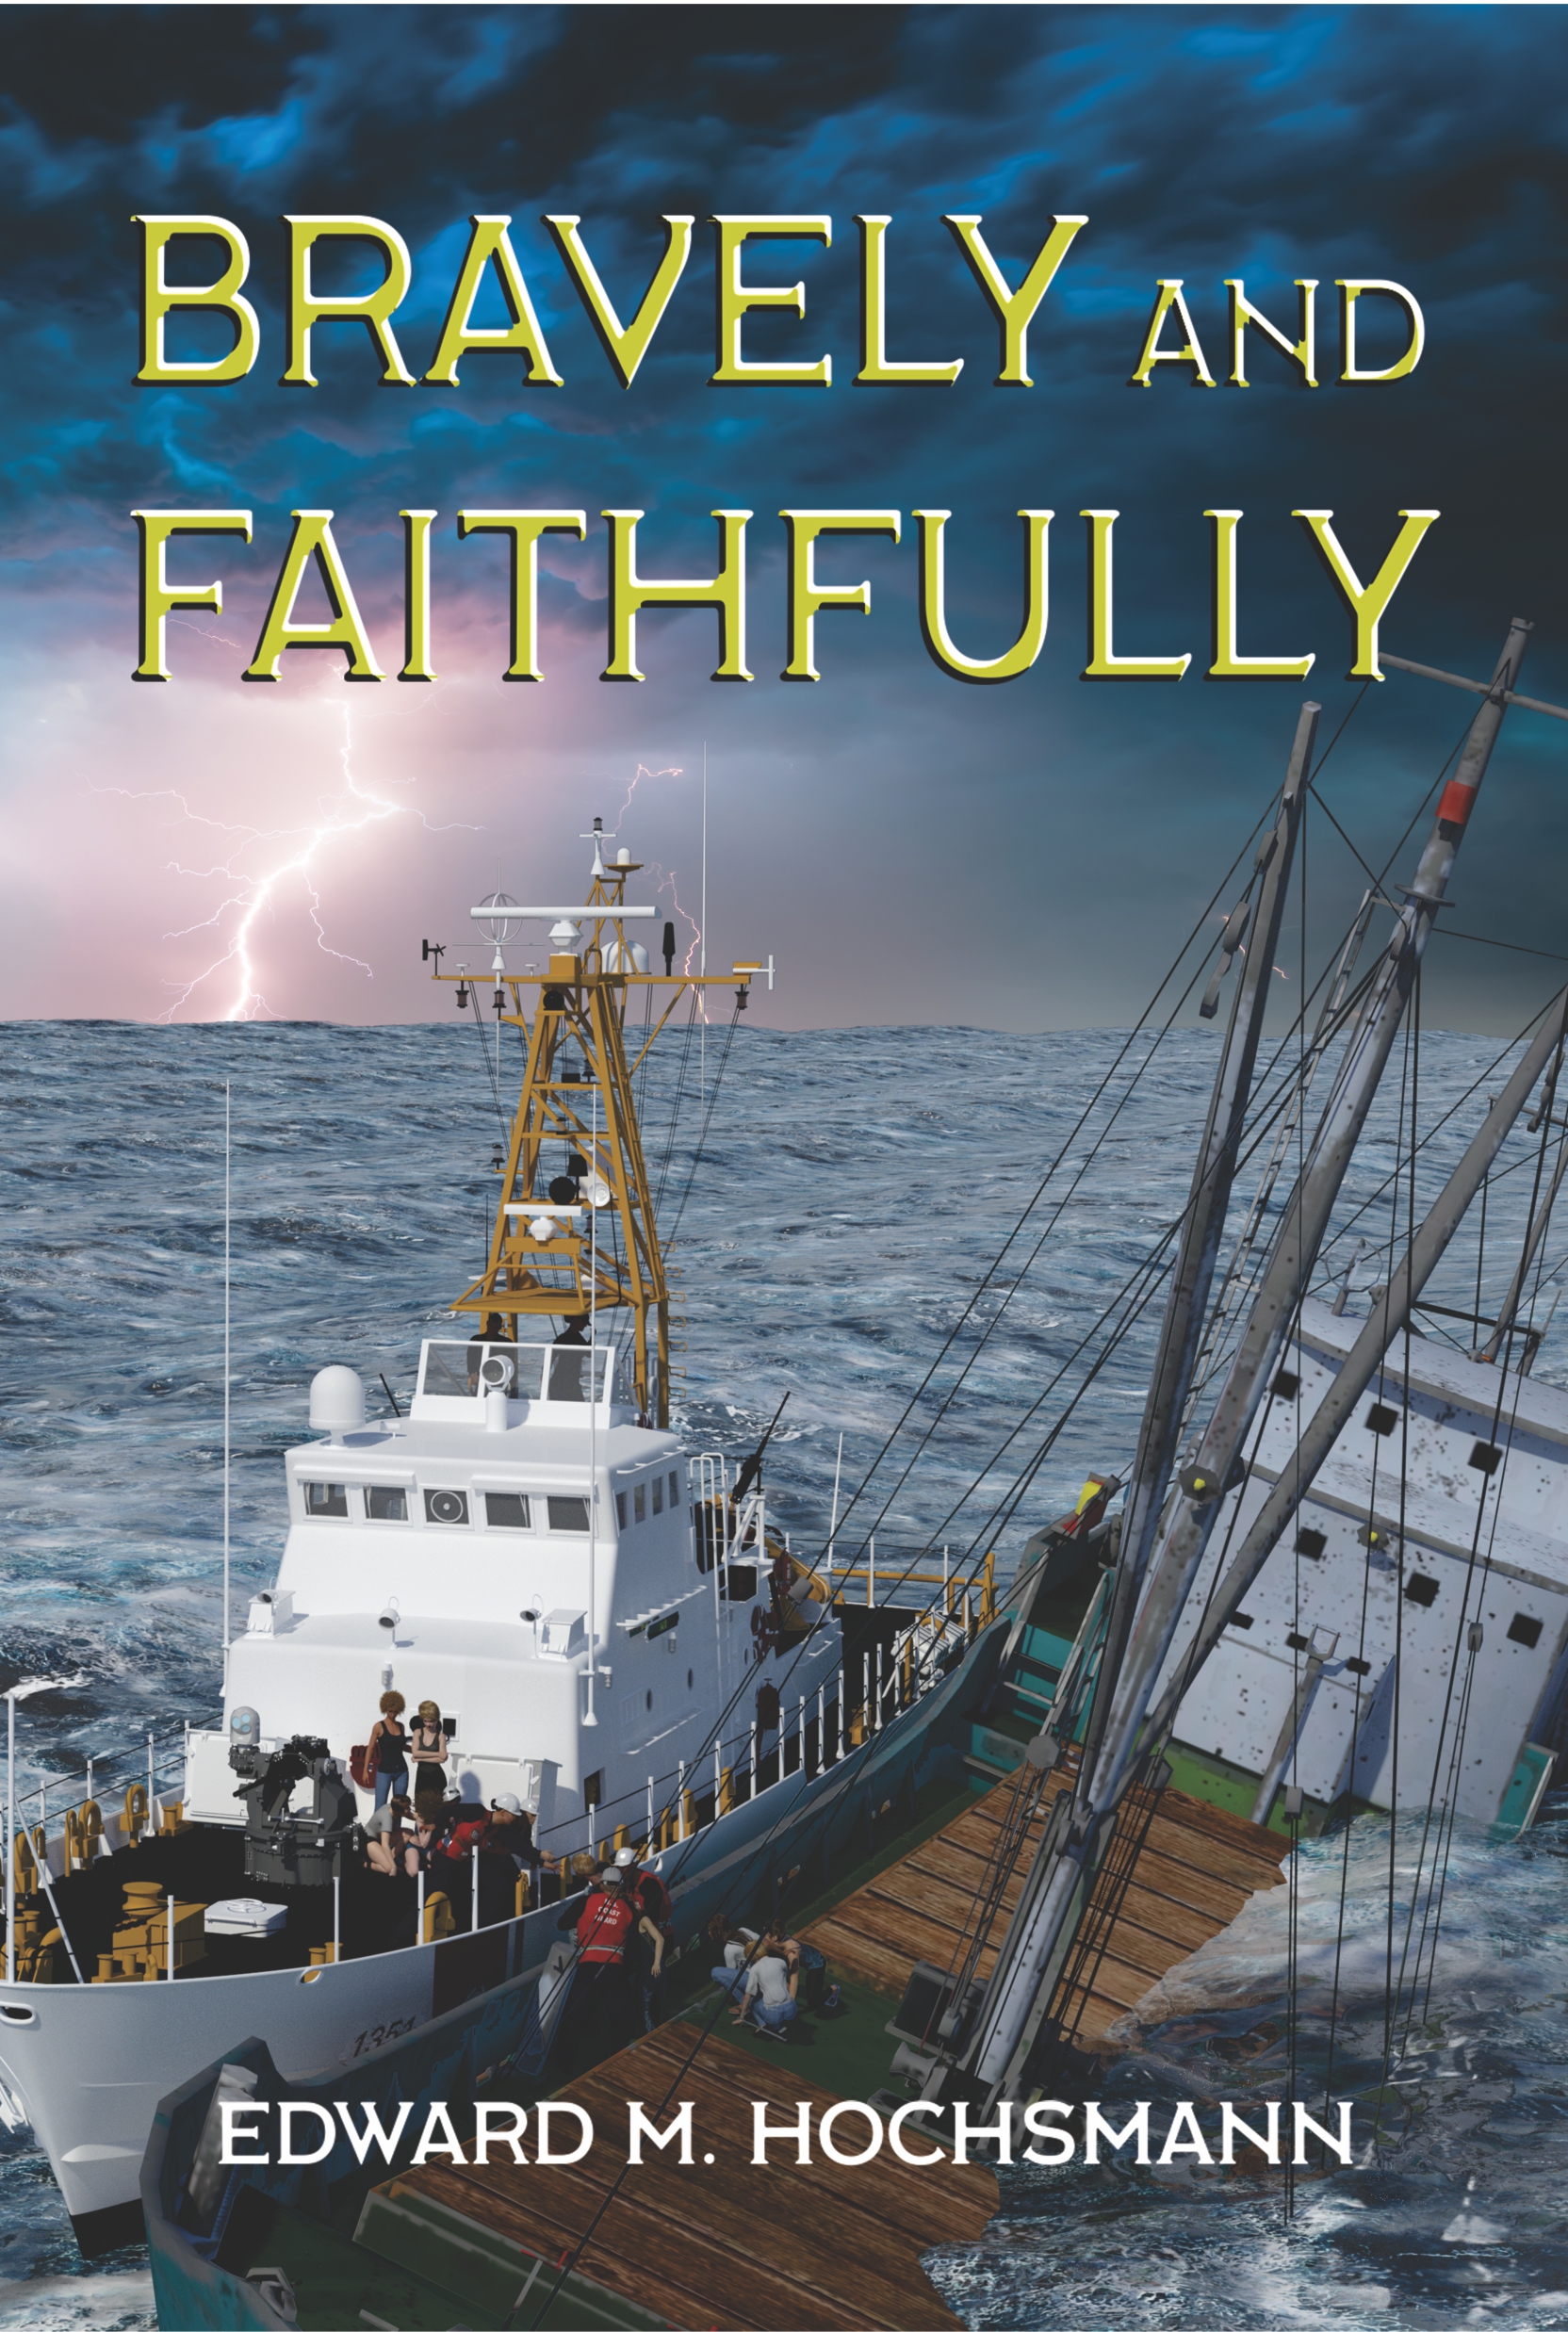 Front cover of Bravely and Faithfully, showing USCGC Kauai rescuing freed human trafficking victims from the sinking freighter Miho Dujam